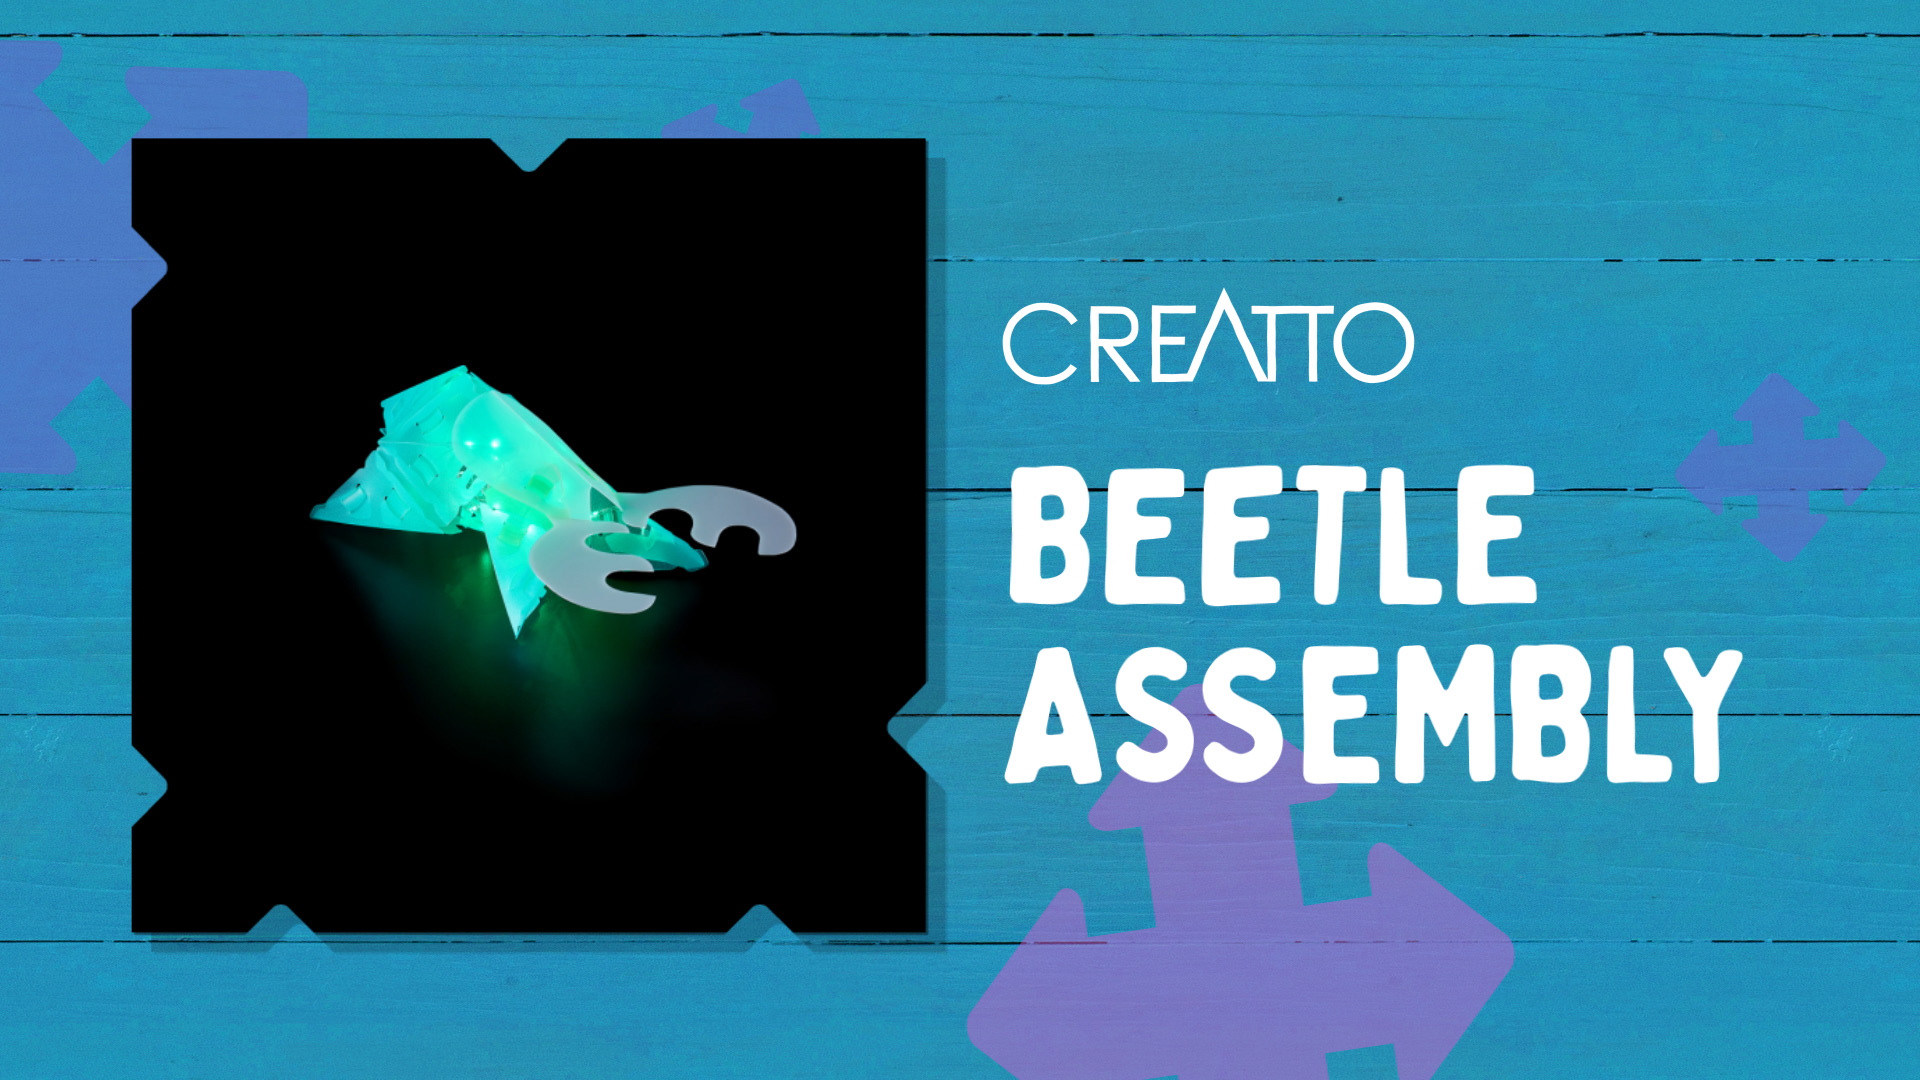 Creatto_-_Beetle_Assembly.jpg